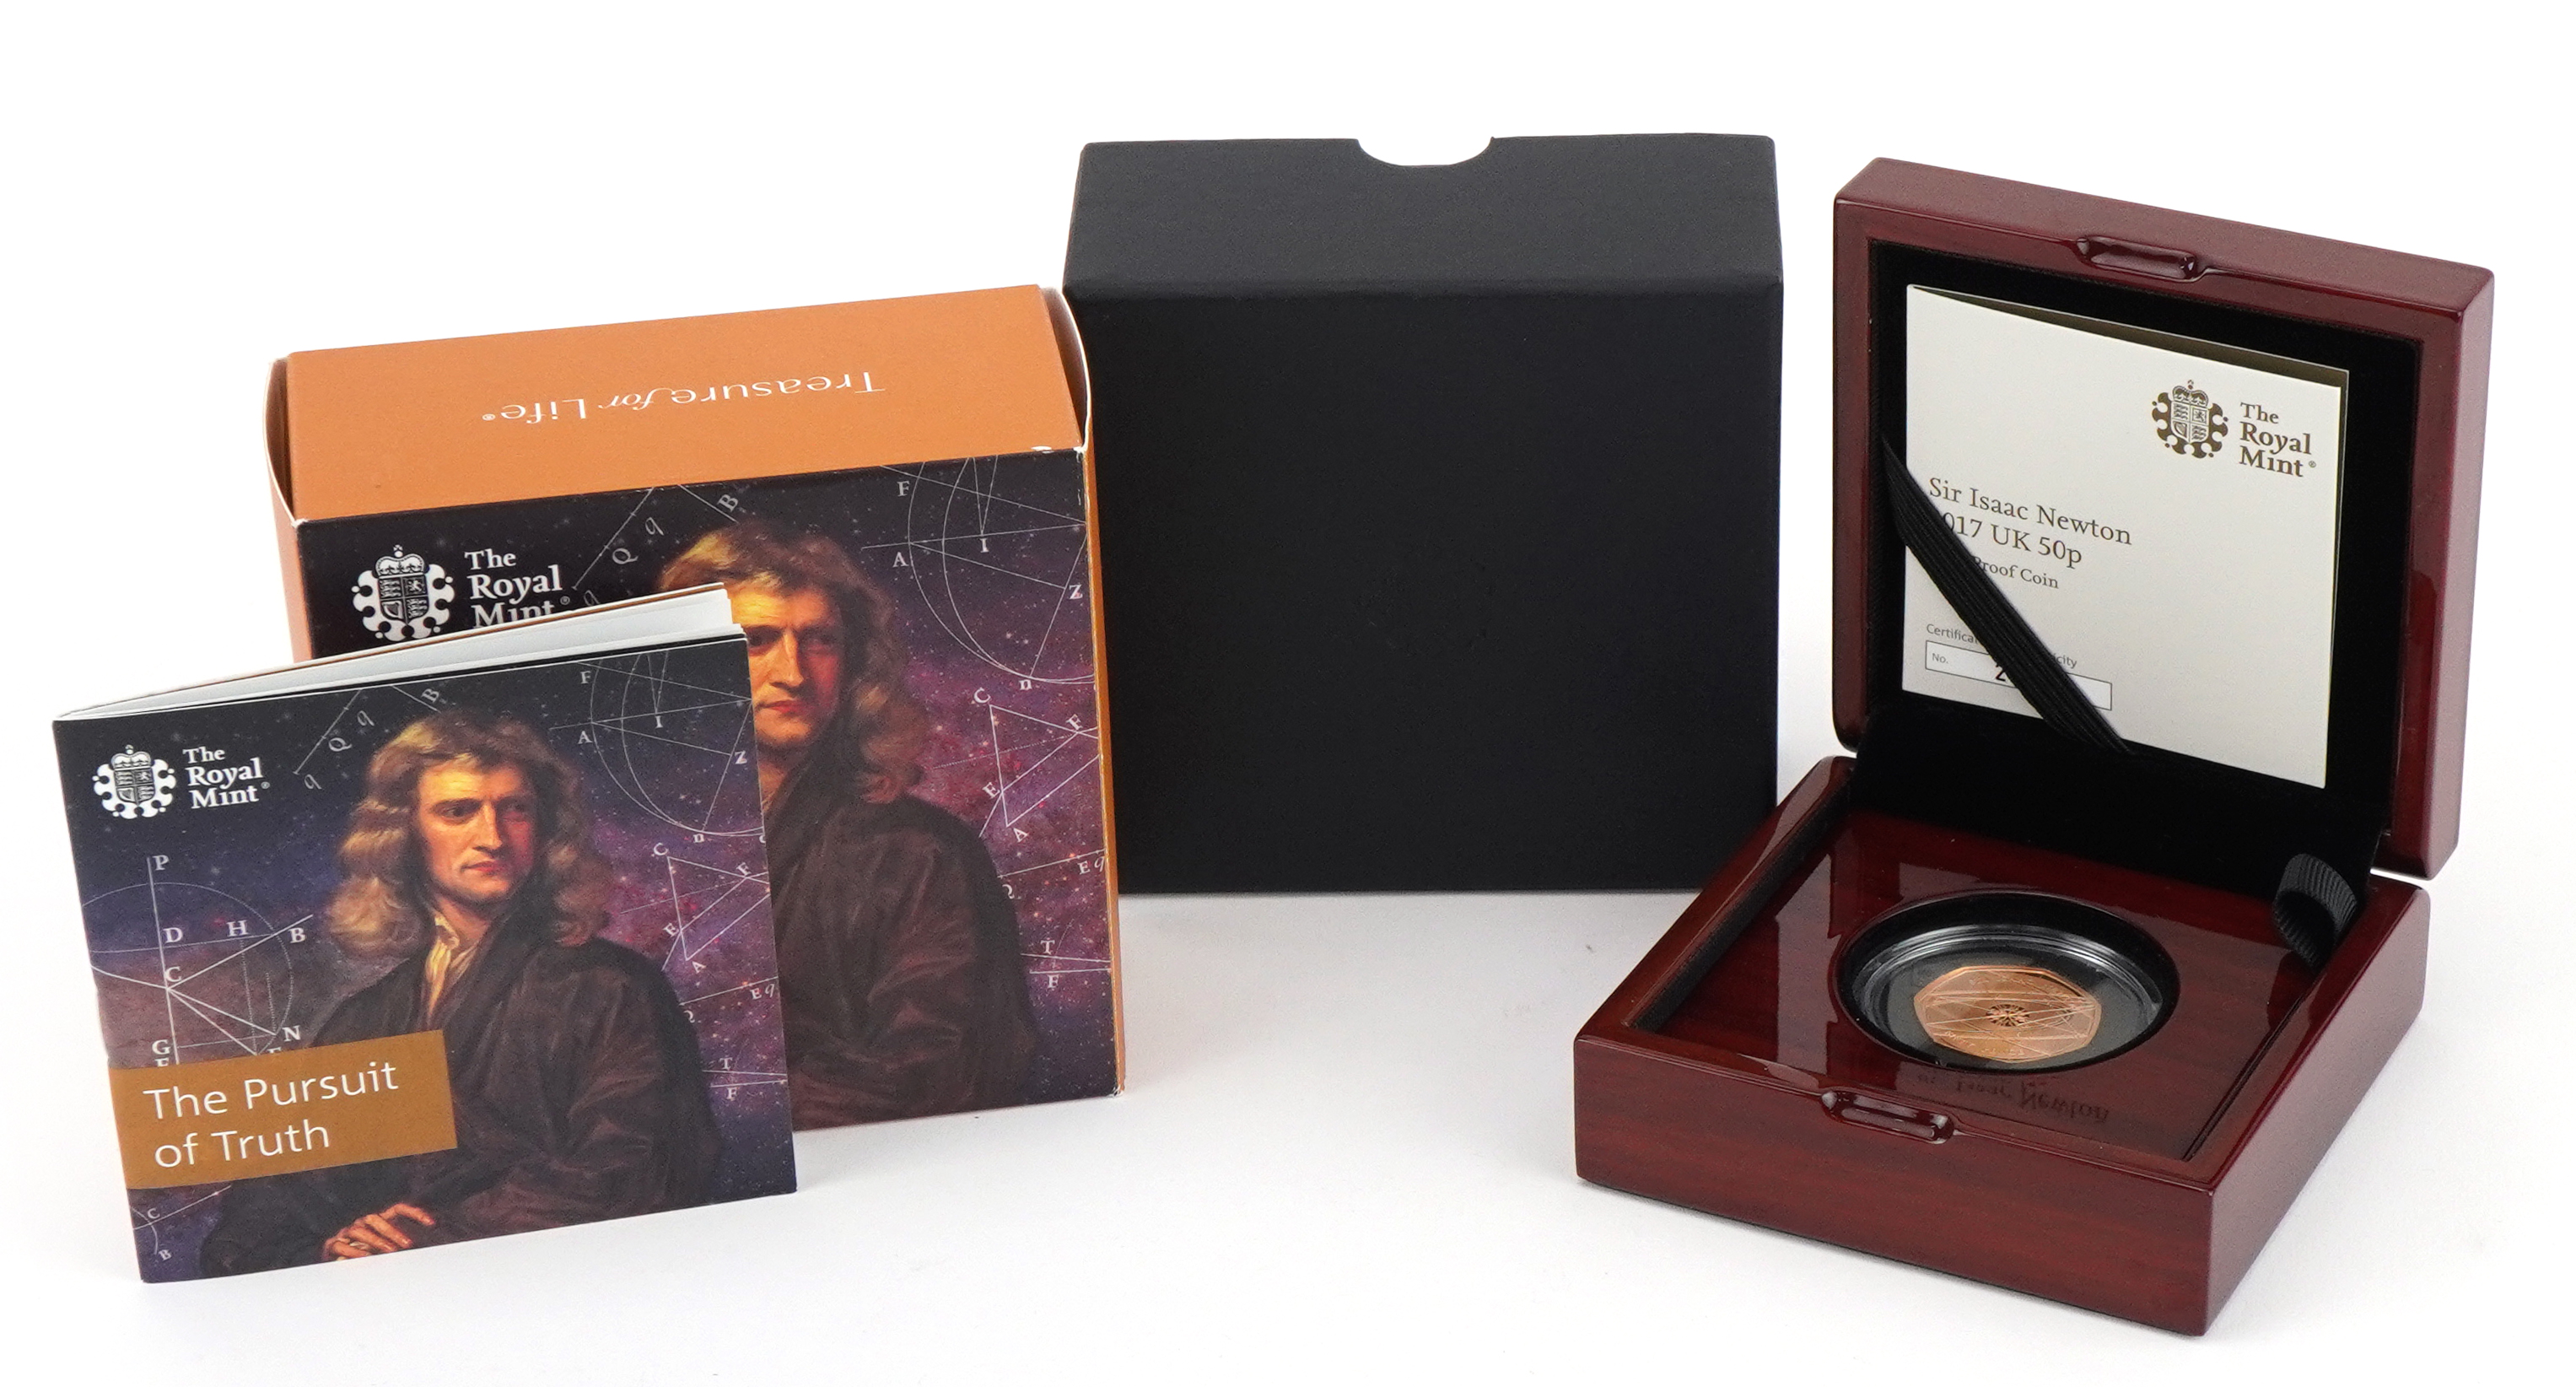 Elizabeth II 2017 gold proof fifty pence piece by The Royal Mint commemorating Sir Isaac Newton with